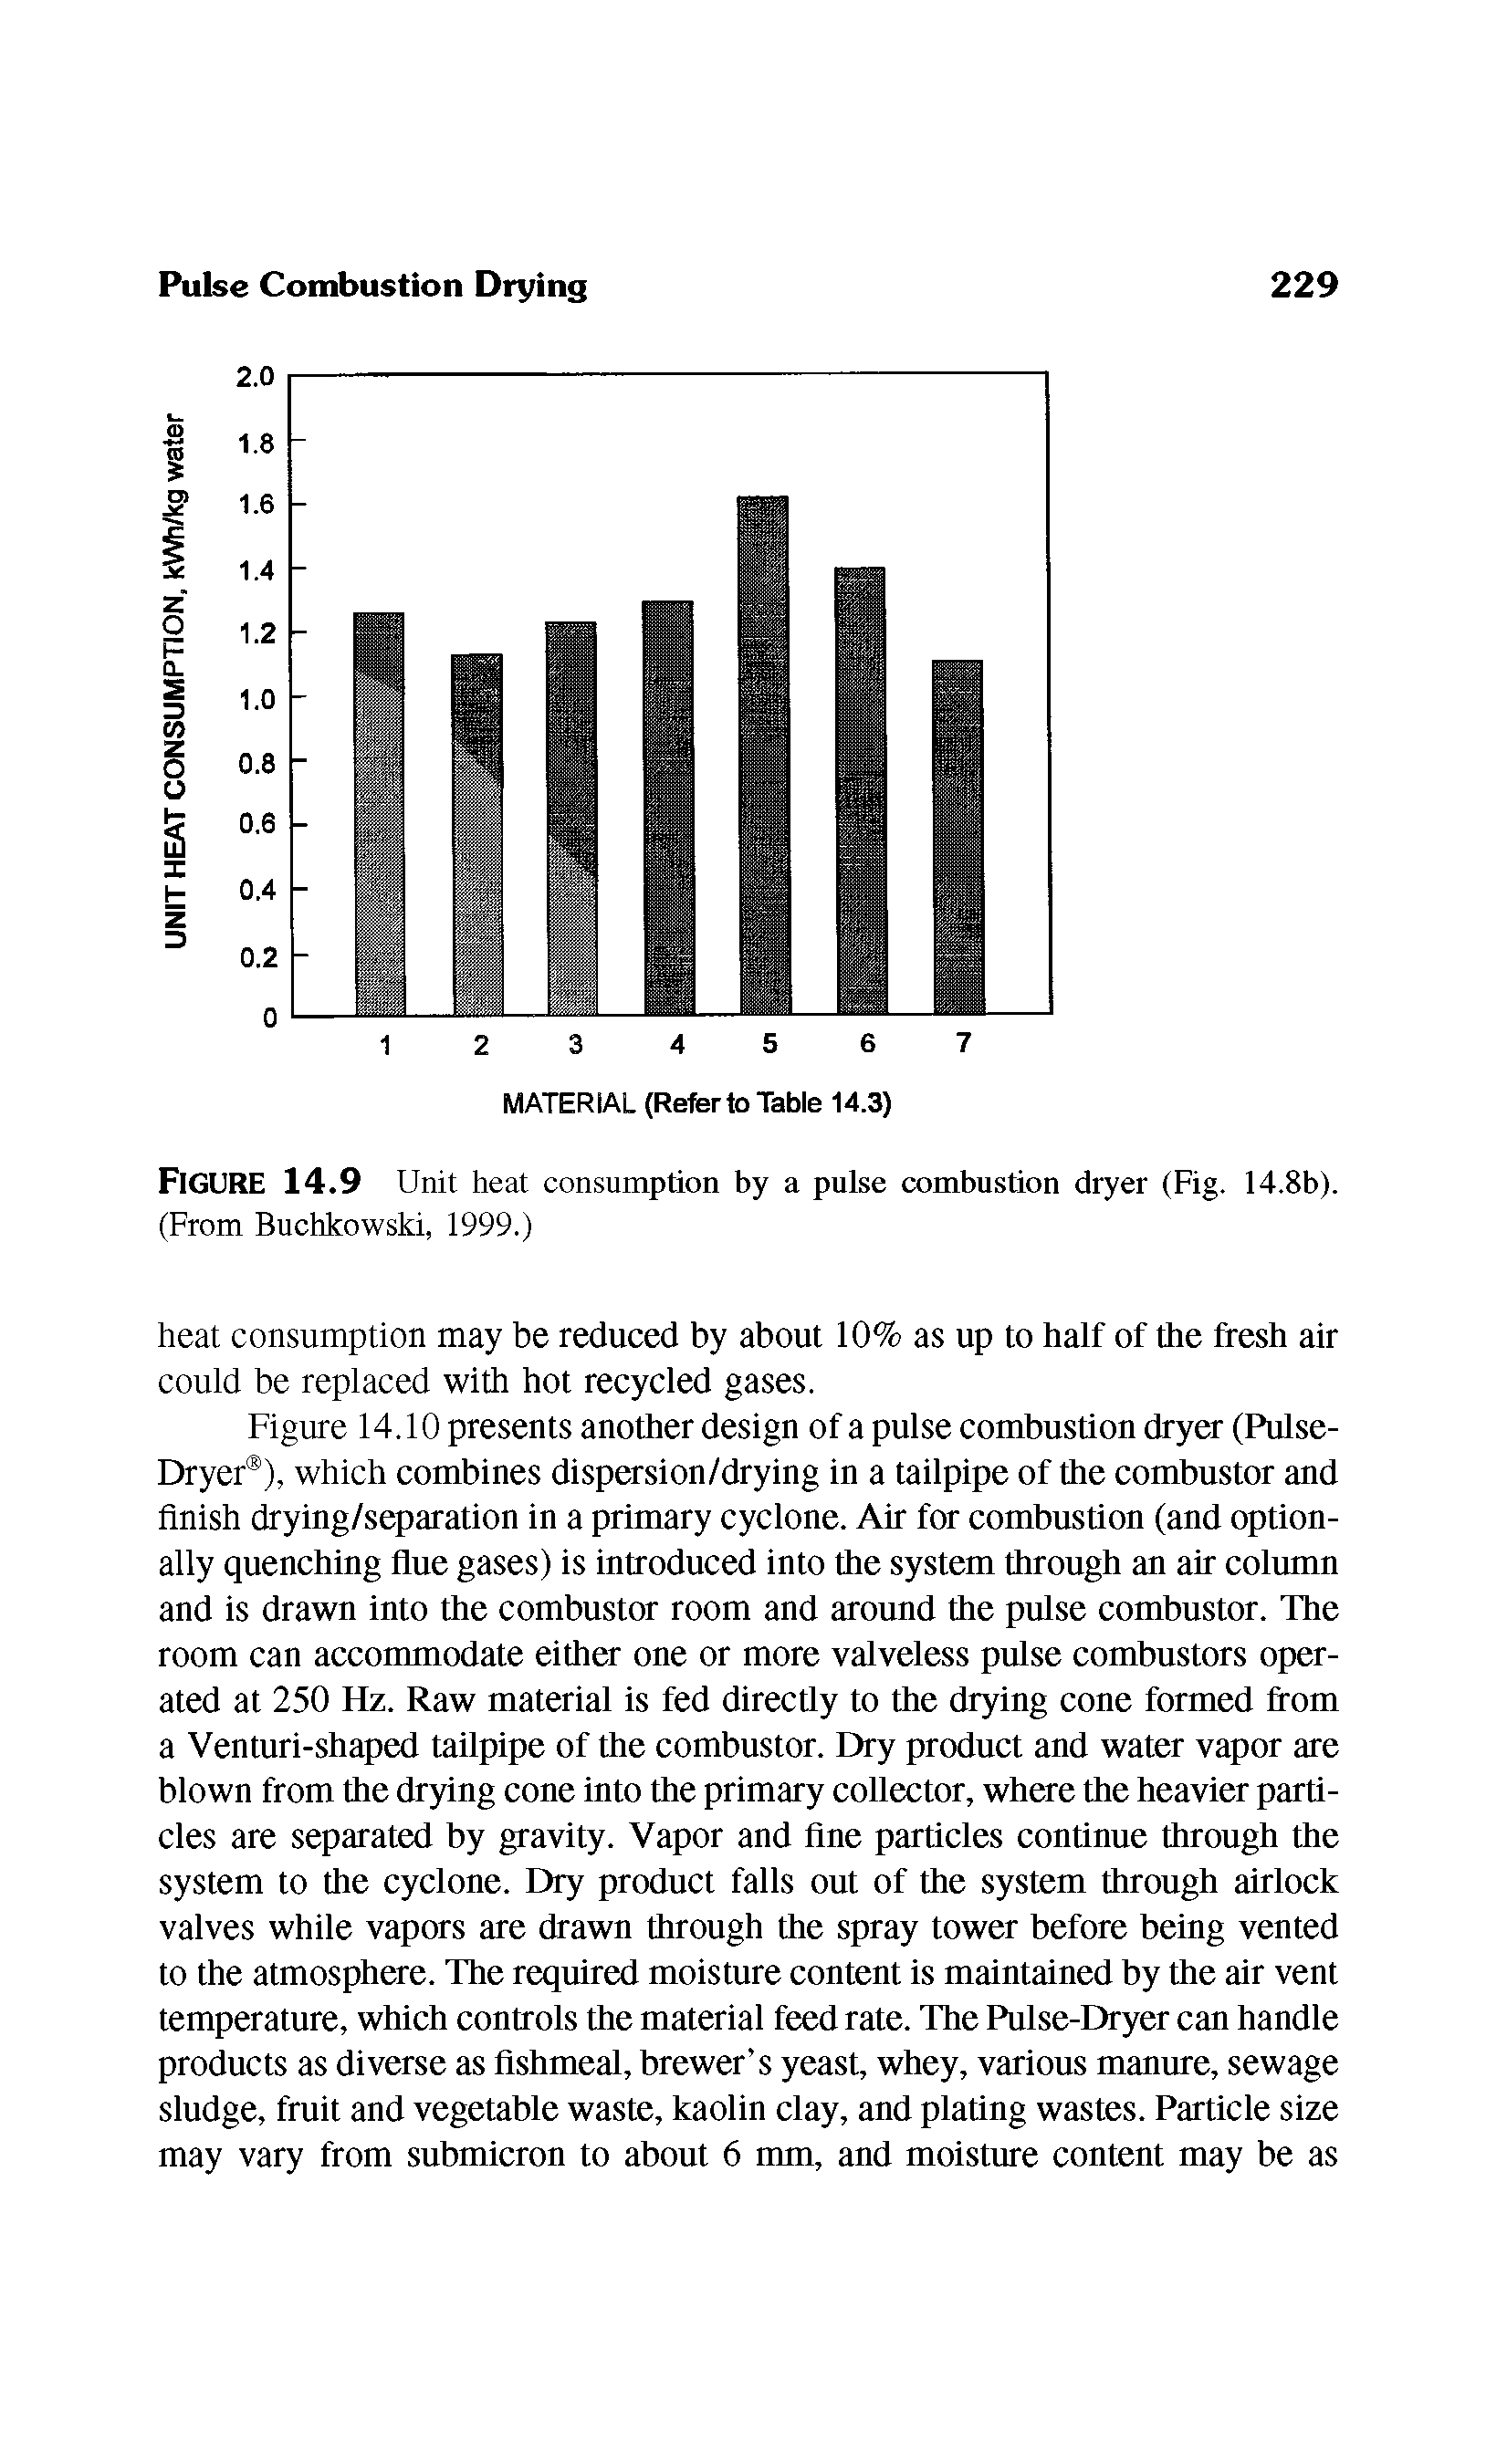 Figure 14.9 Unit heat consumption by a pulse combustion dryer (Fig. 14.8b). (From Buchkowski, 1999.)...